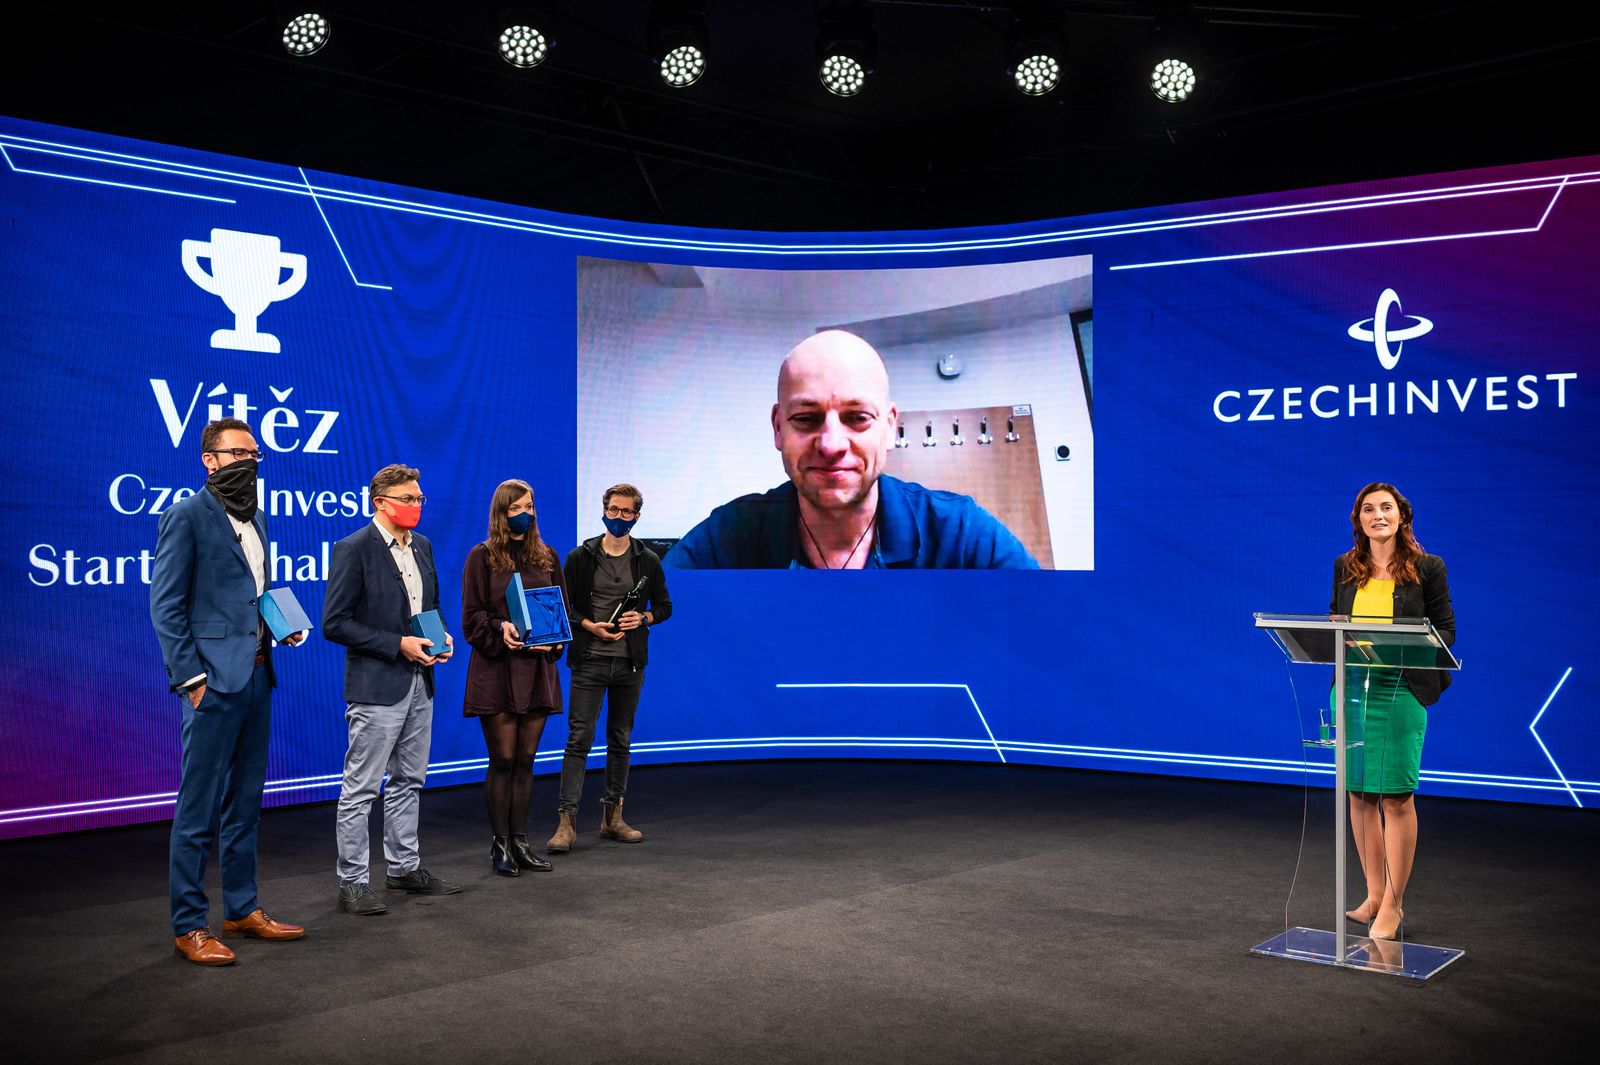 We are happy to announce that we have won CzechInvest Startup Challenge 2020!